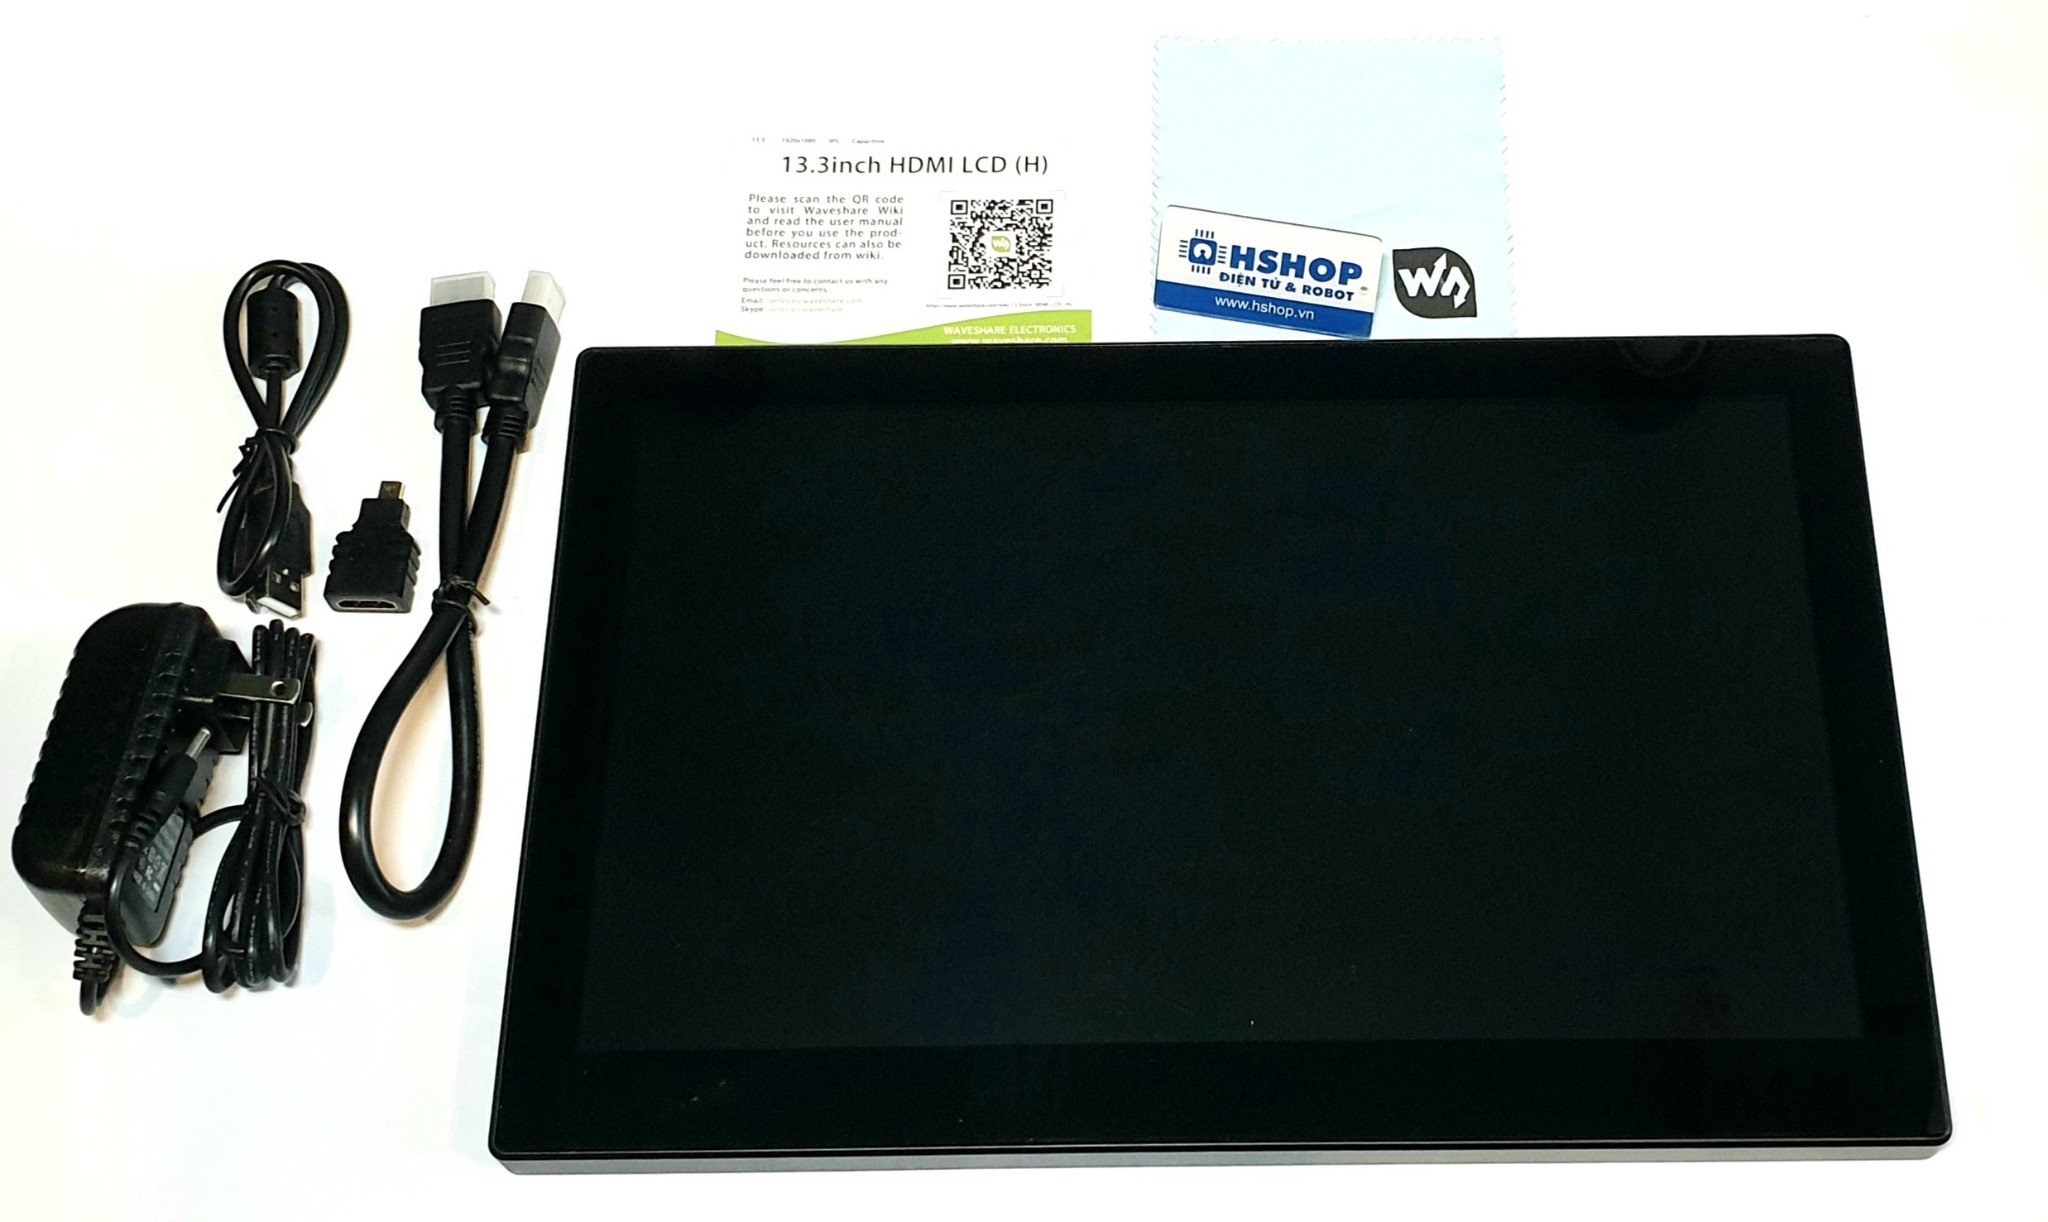 Màn hình Waveshare 13.3 inch HDMI Capacitive Touch Screen LCD (H) with Case V2